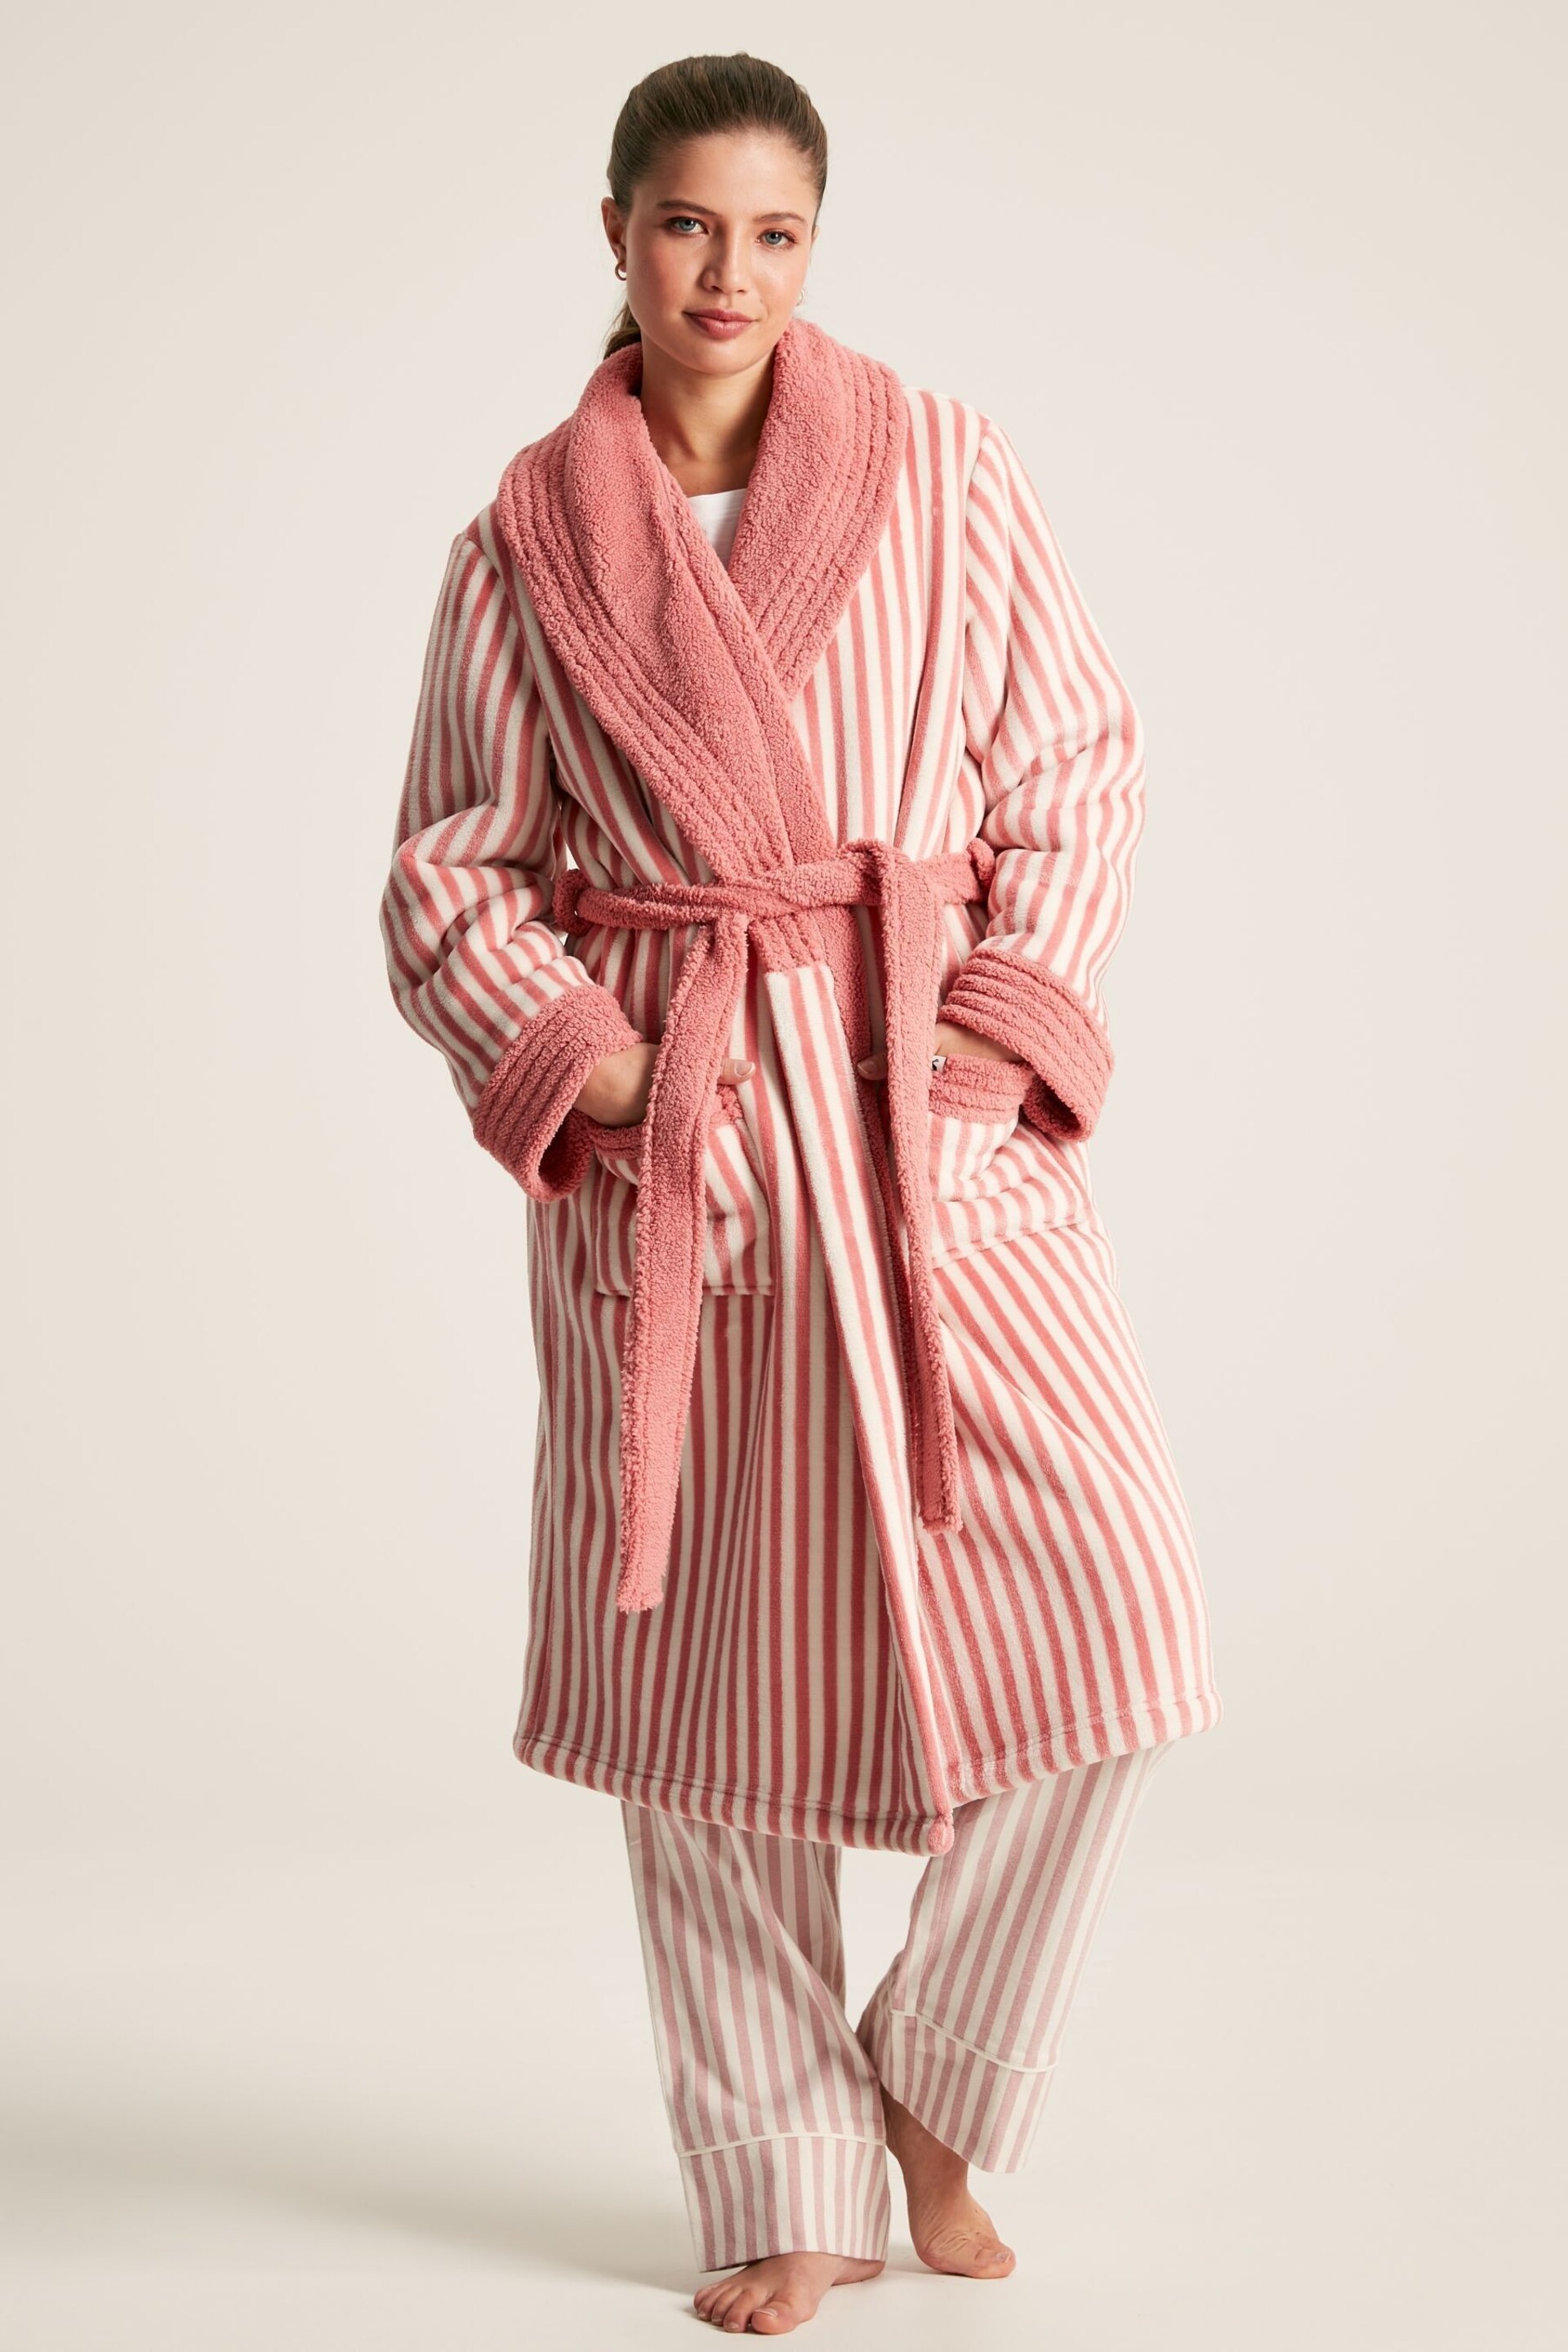 Joules Matilda Pink Fleece Lined Striped Dressing Gown - Image 1 of 6